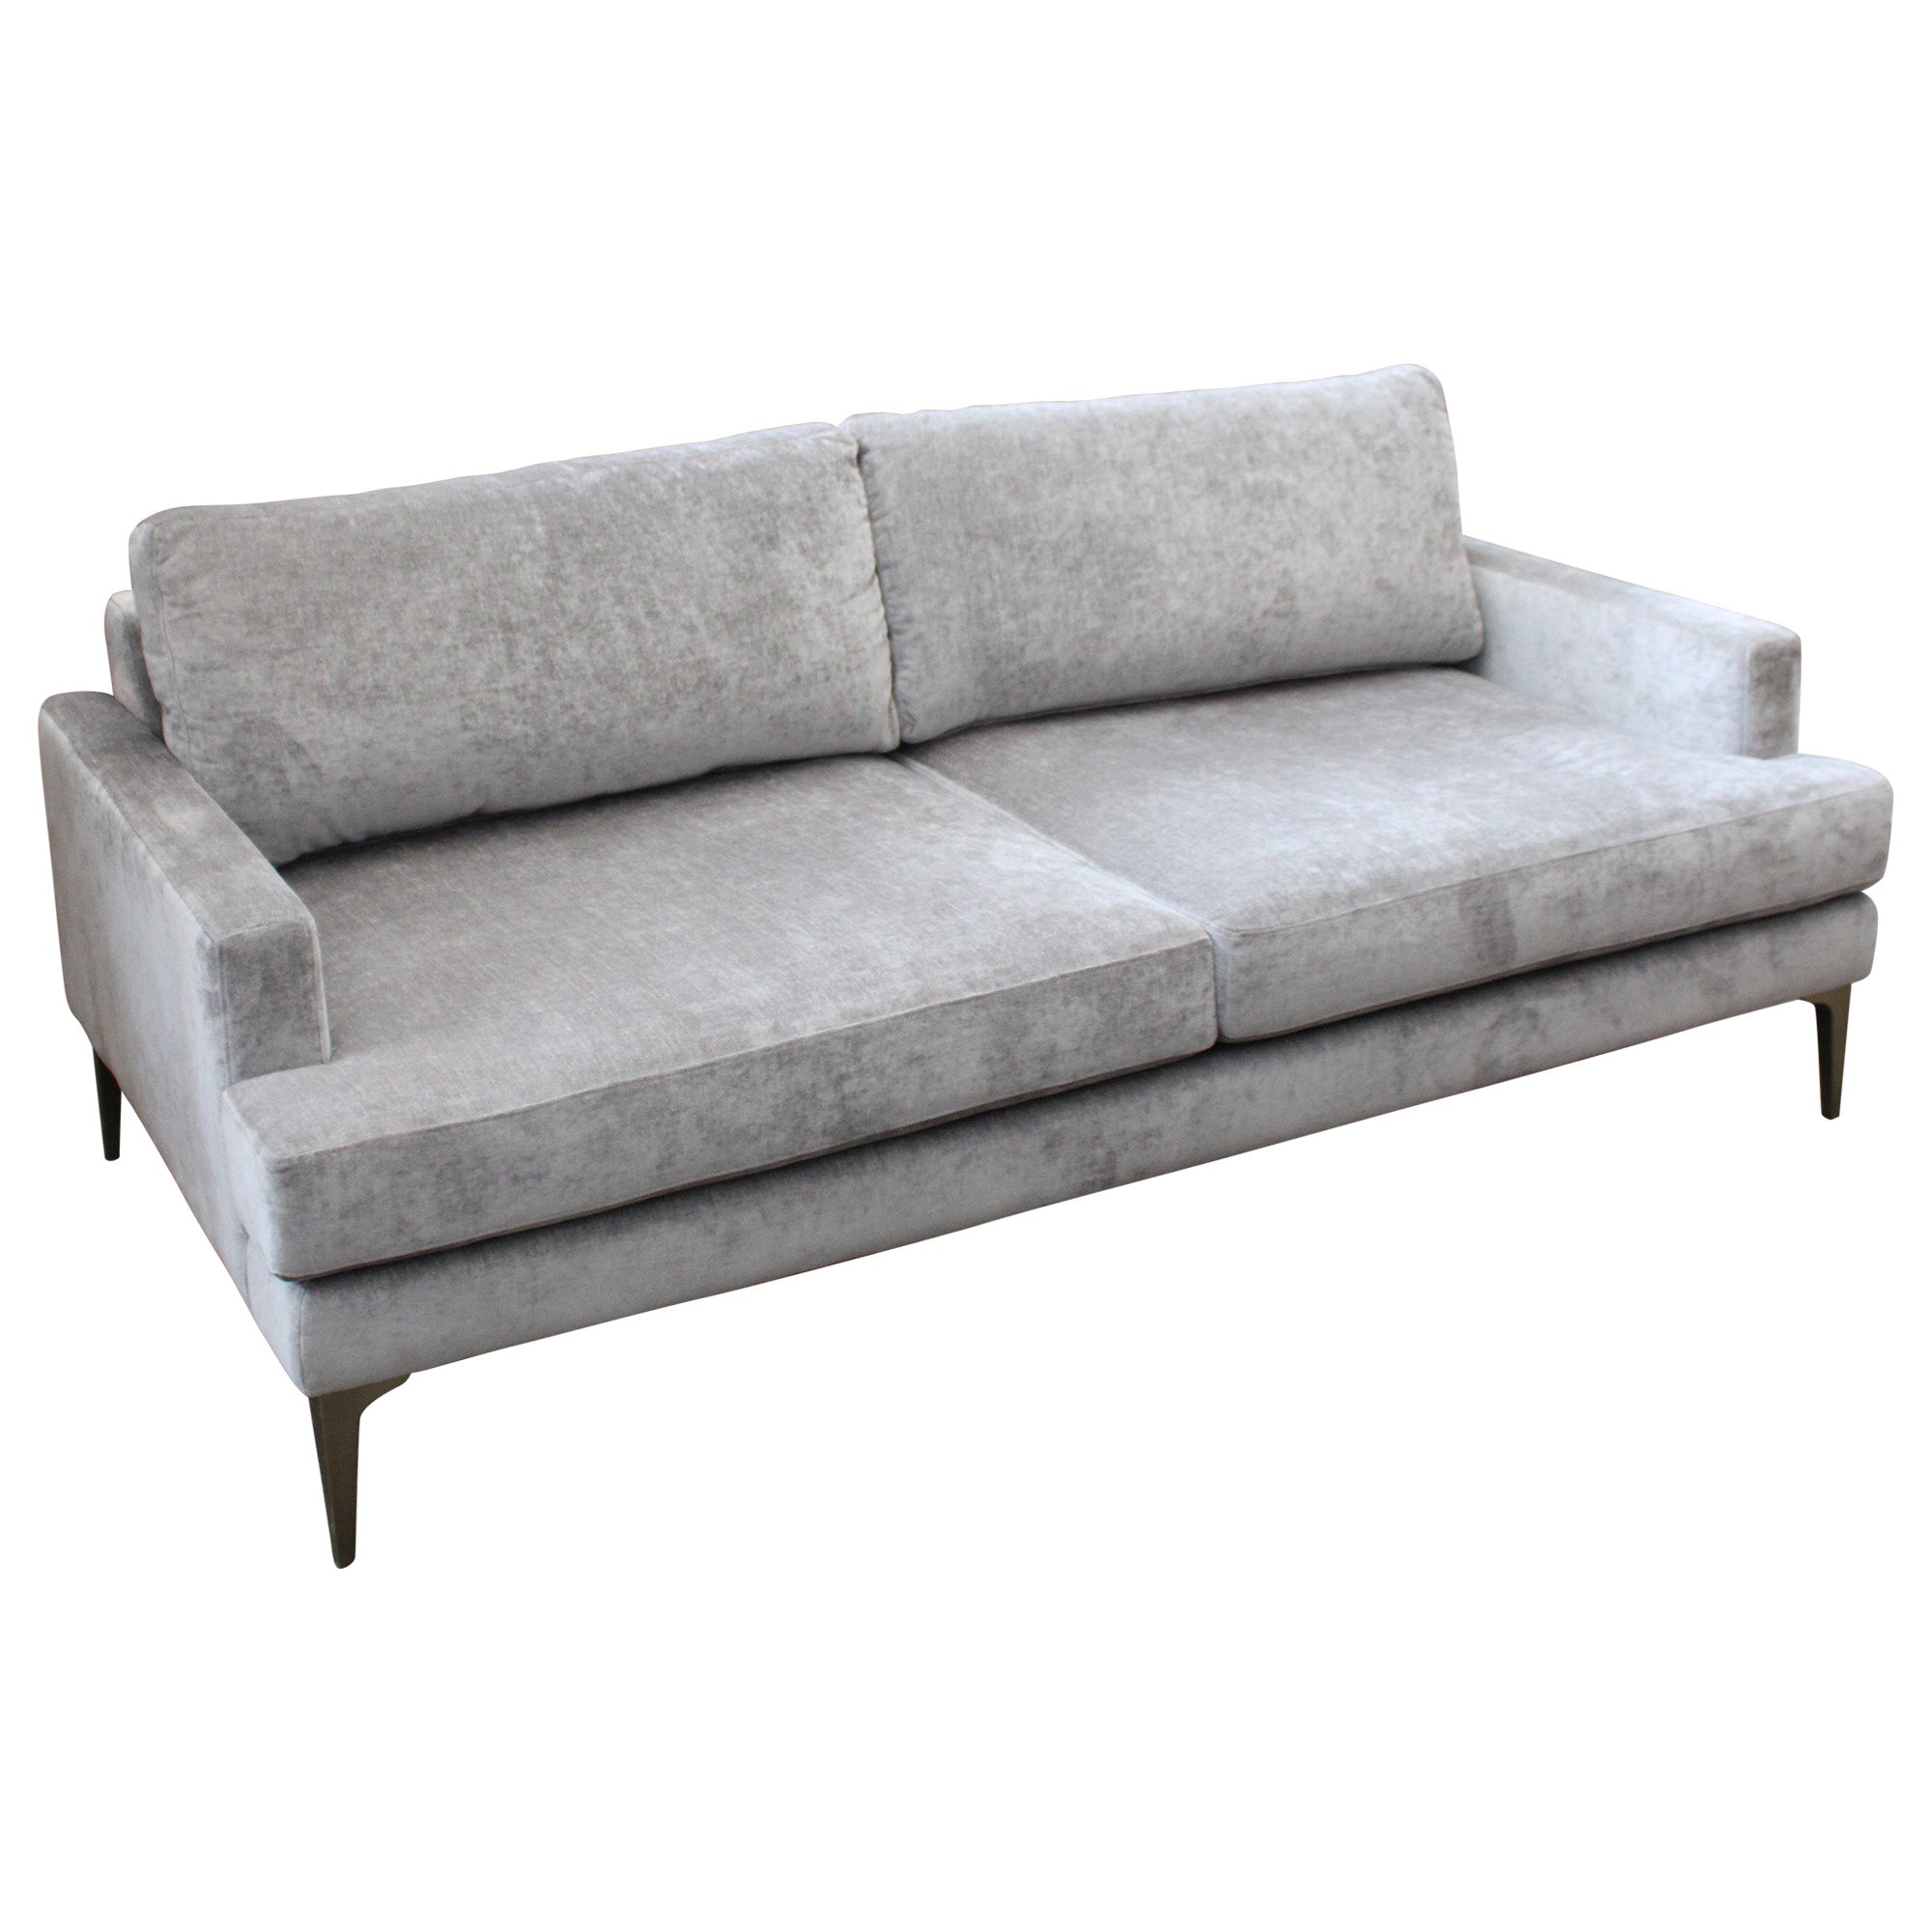 West Elm Andes Sofa, Grey Velvet - Preowned